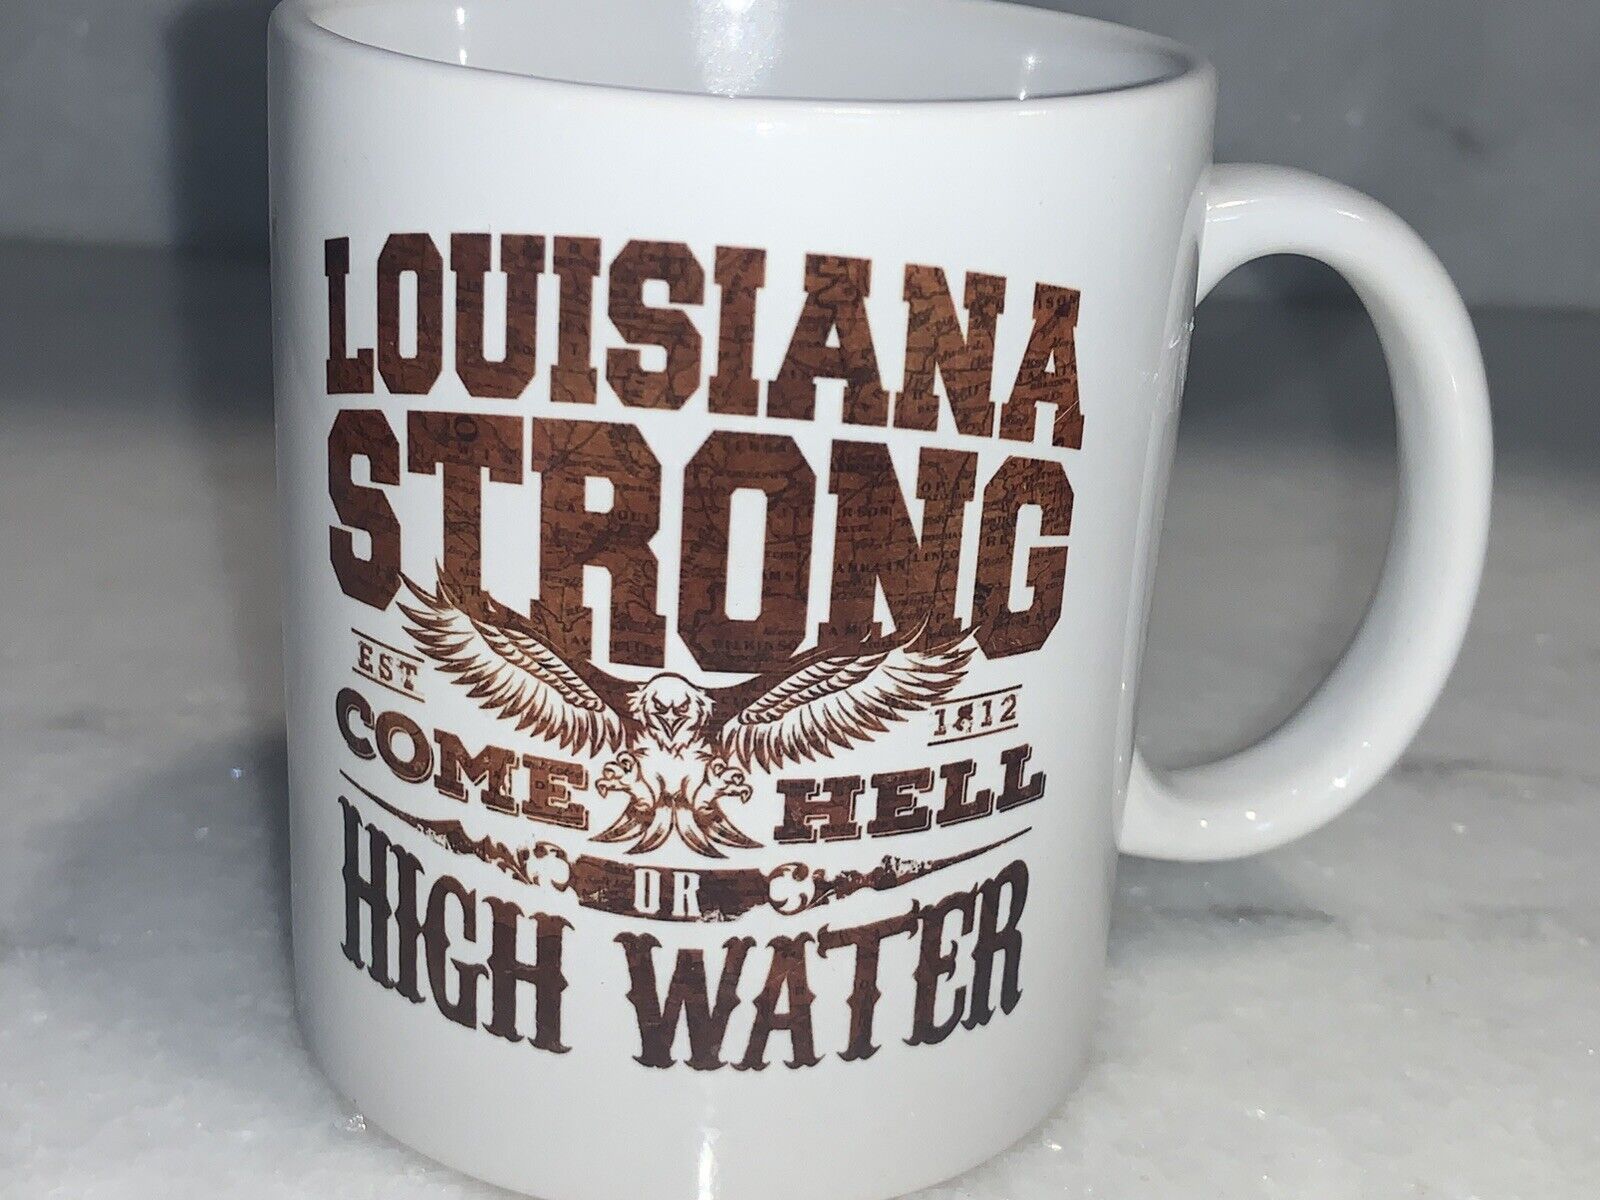 LOUISIANA STRONG COFFEE MUG CUP TEA COME HELL OR HIGH WATER EST 1812 2 SIDED